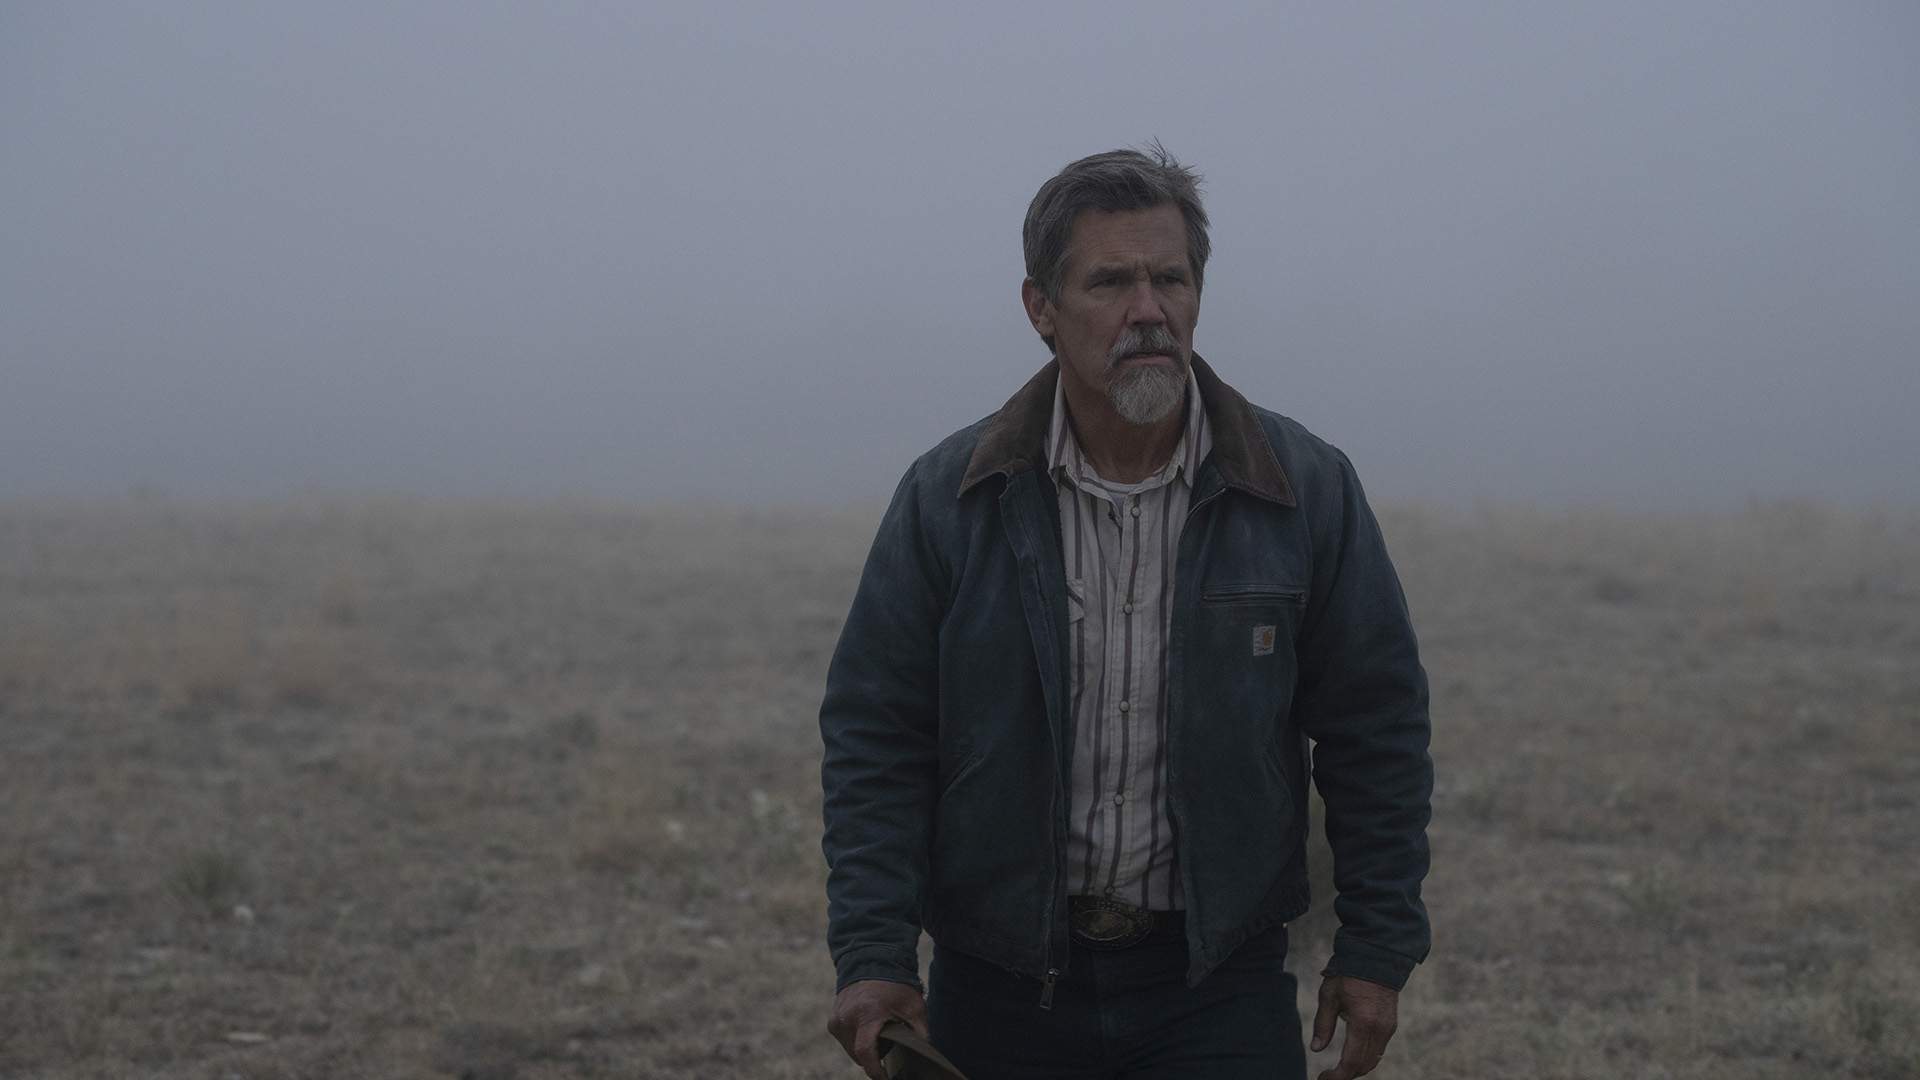 A Western, an Offbeat Mystery and Eerie Sci-Fi: That's New Josh Brolin-Starring Series 'Outer Range'